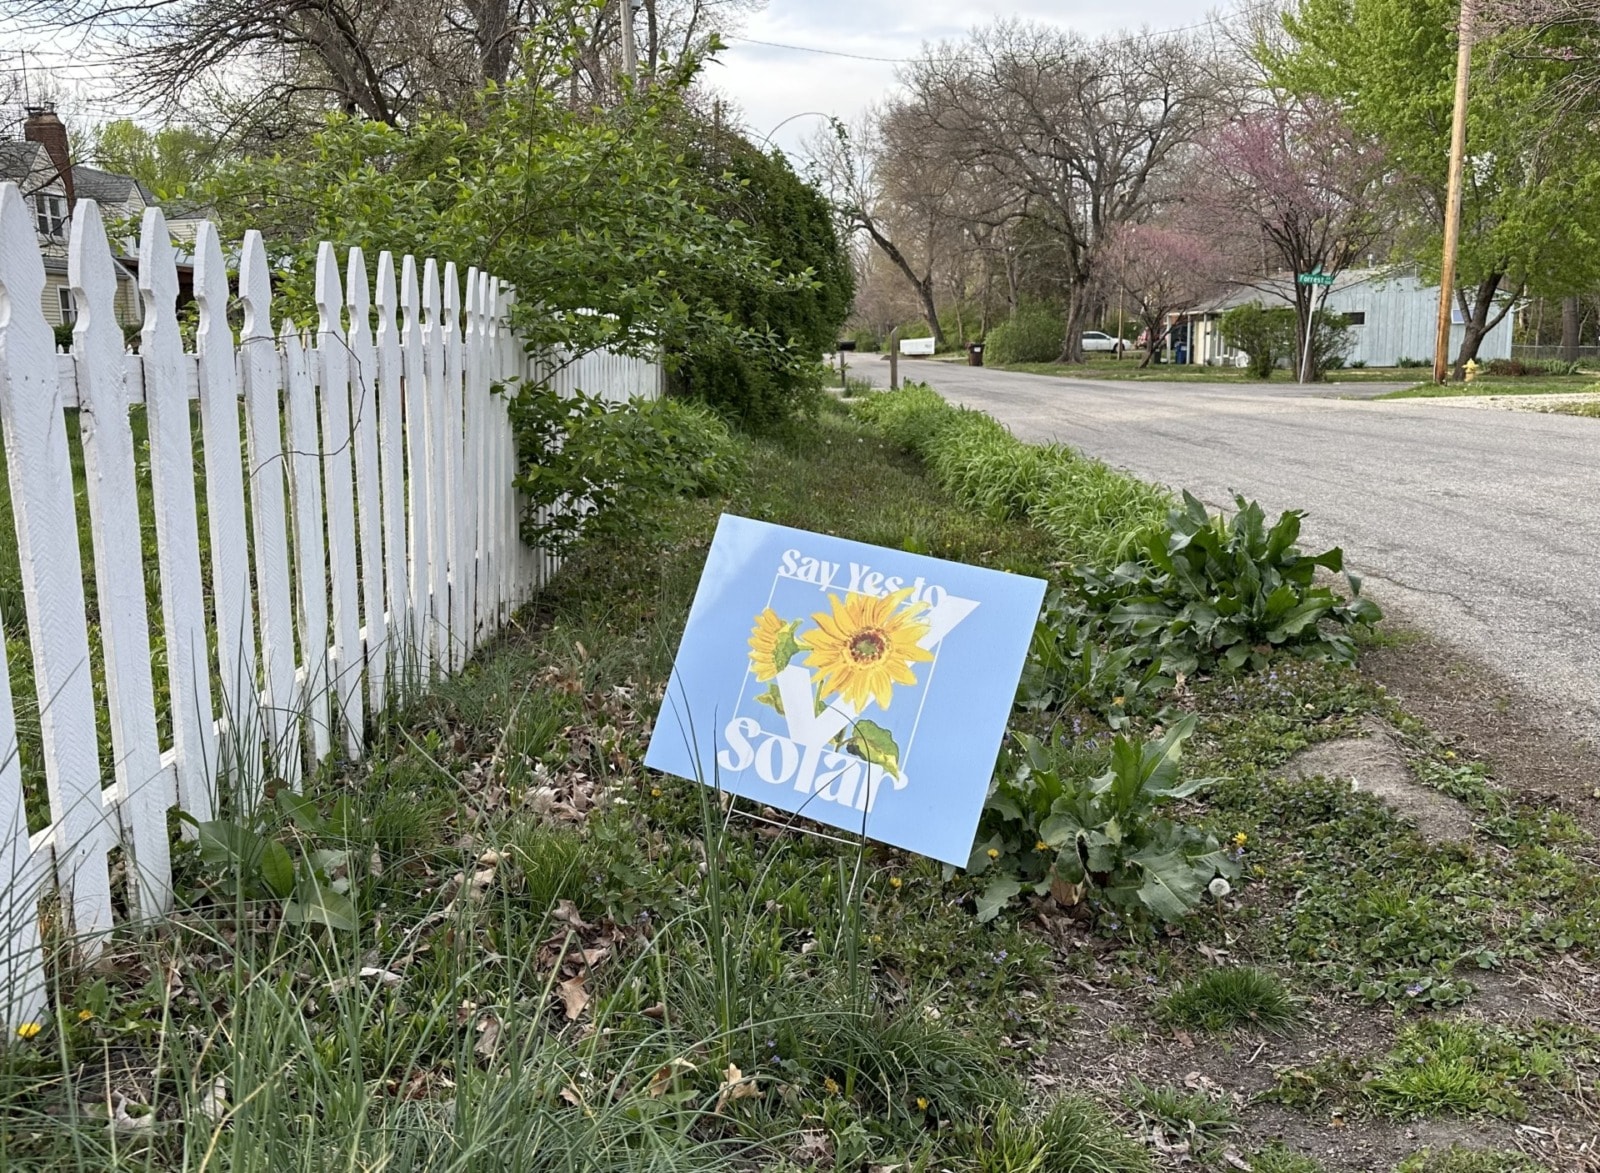 a yard sign on a residential street has a sunflower and a check mark. it reads "Say yes to solar" 